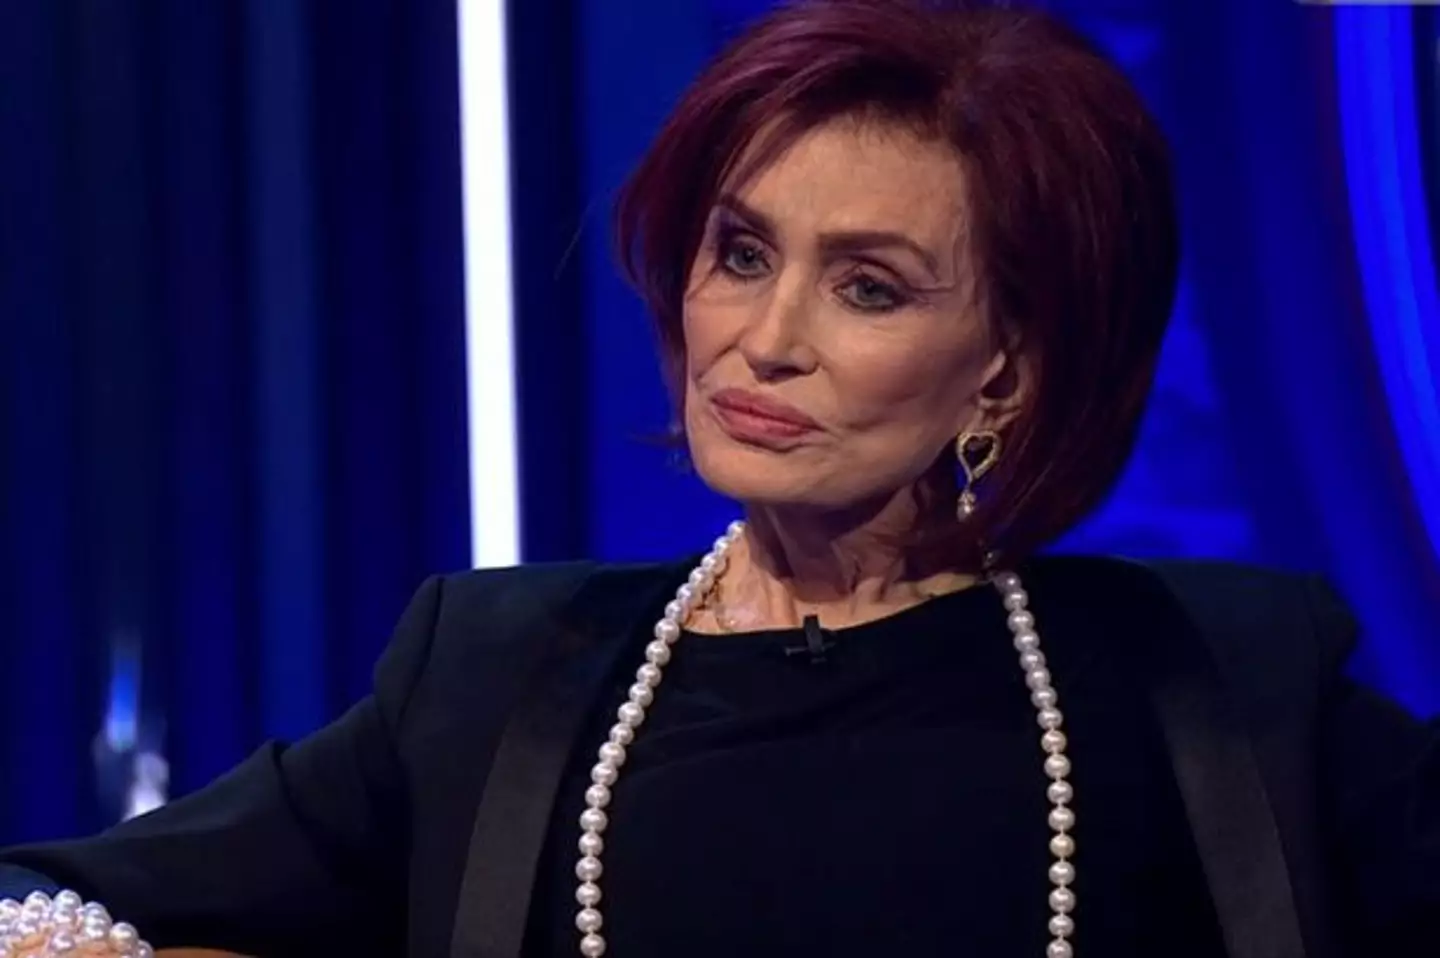 ITV viewers slammed Sharon Osbourne's CBB exit interview as 'painful'.